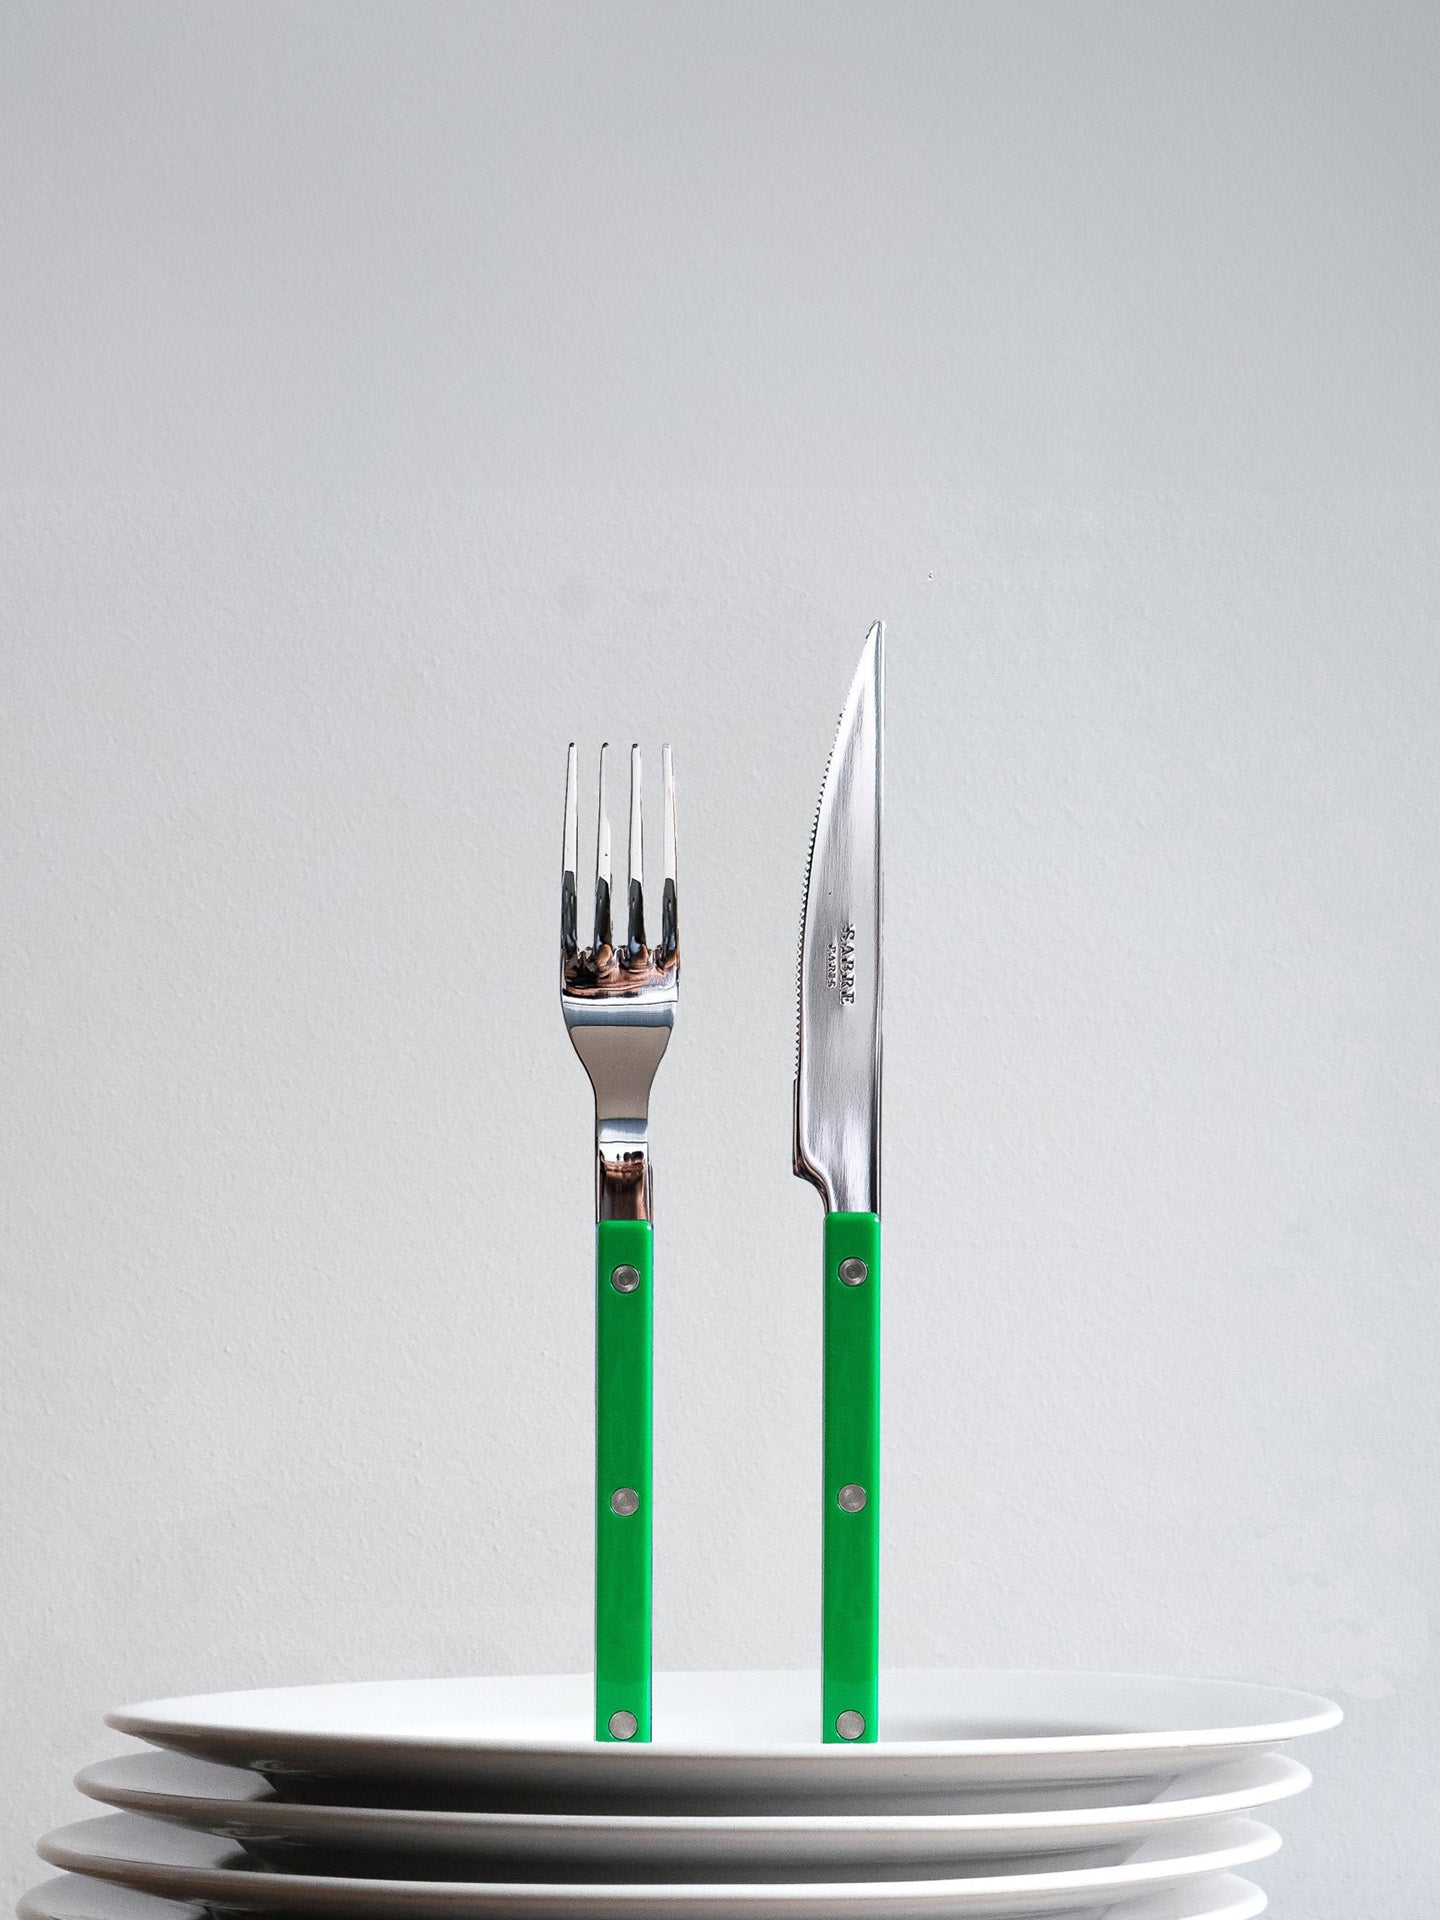 The acrylic handle in the Bistrot series is decorated with stainless steel rivets. The Bistro garden green dinner knives are easy just to shove in a dishwasher to clean.